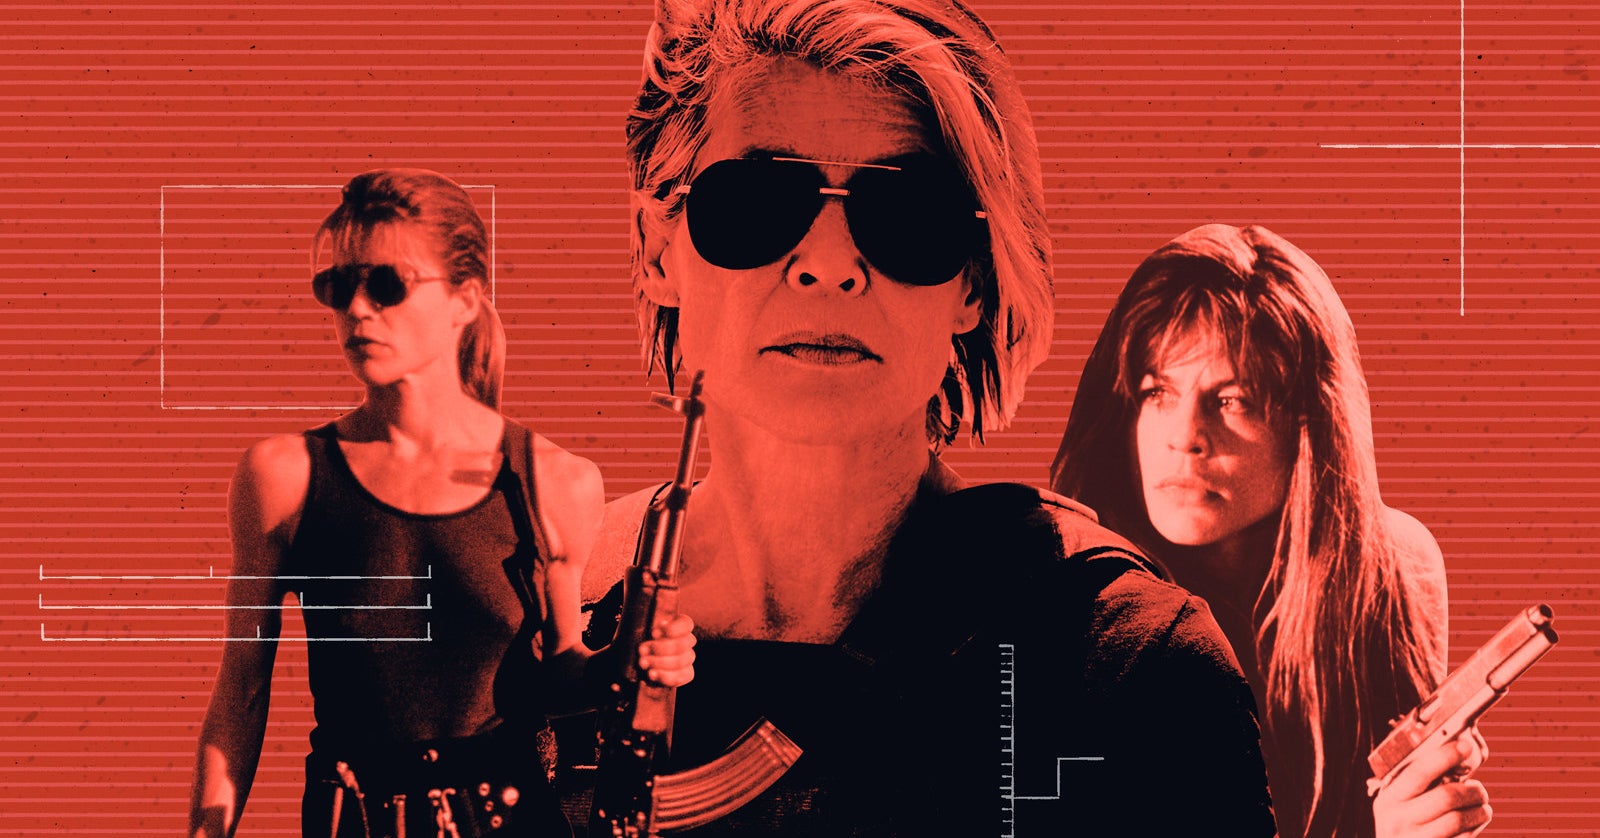 The Terminator Franchise Has Let Sarah Connor Down